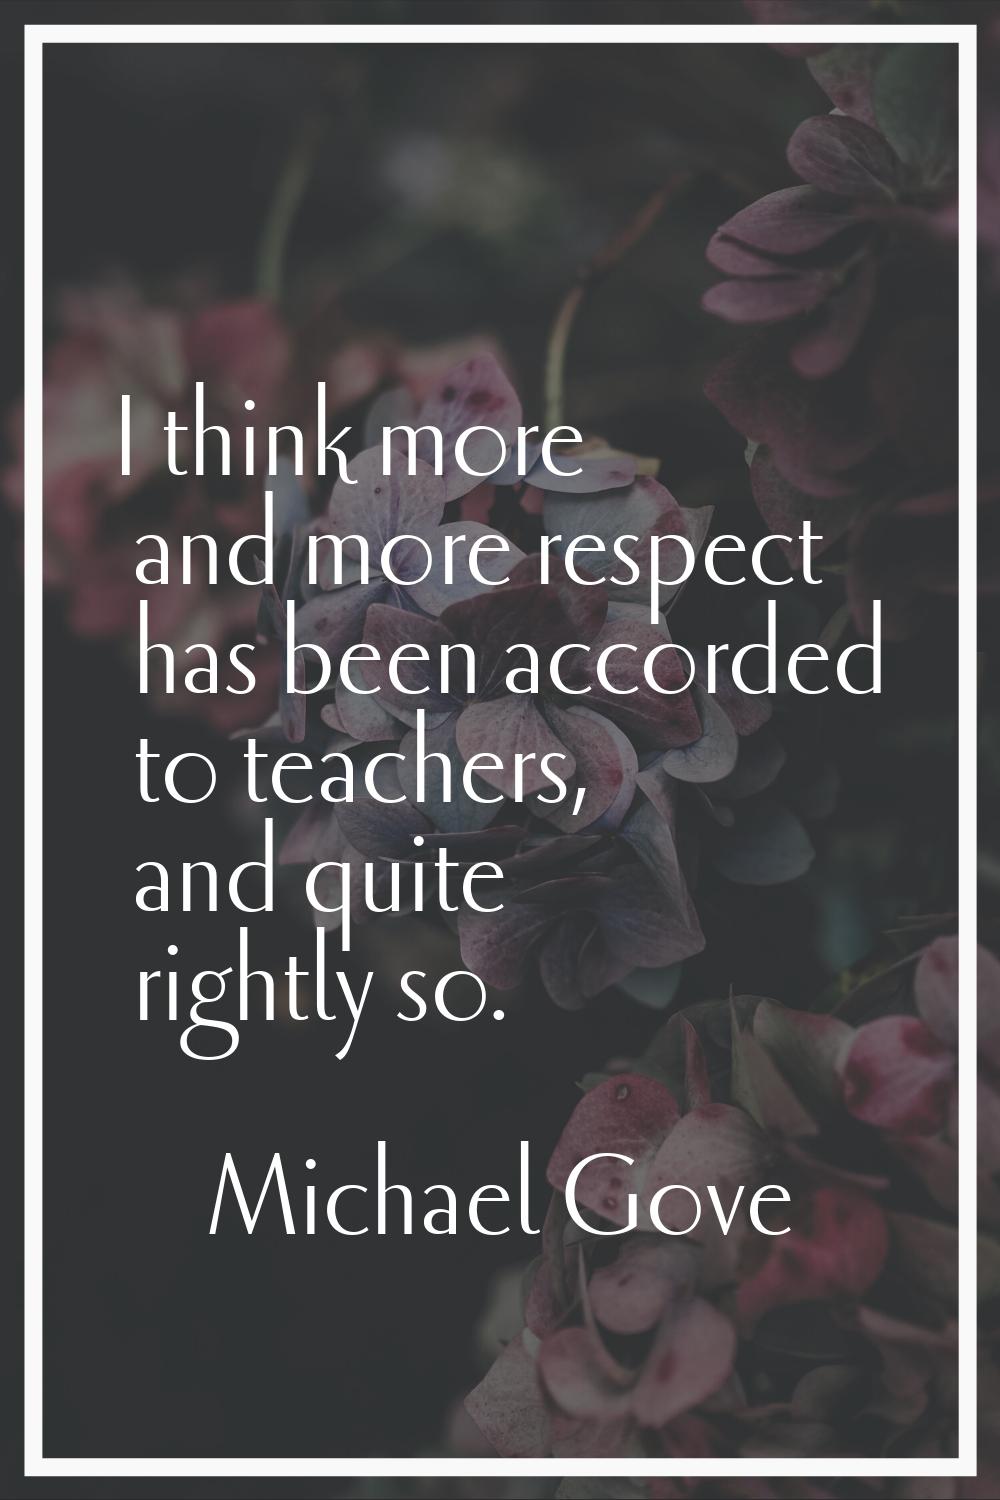 I think more and more respect has been accorded to teachers, and quite rightly so.